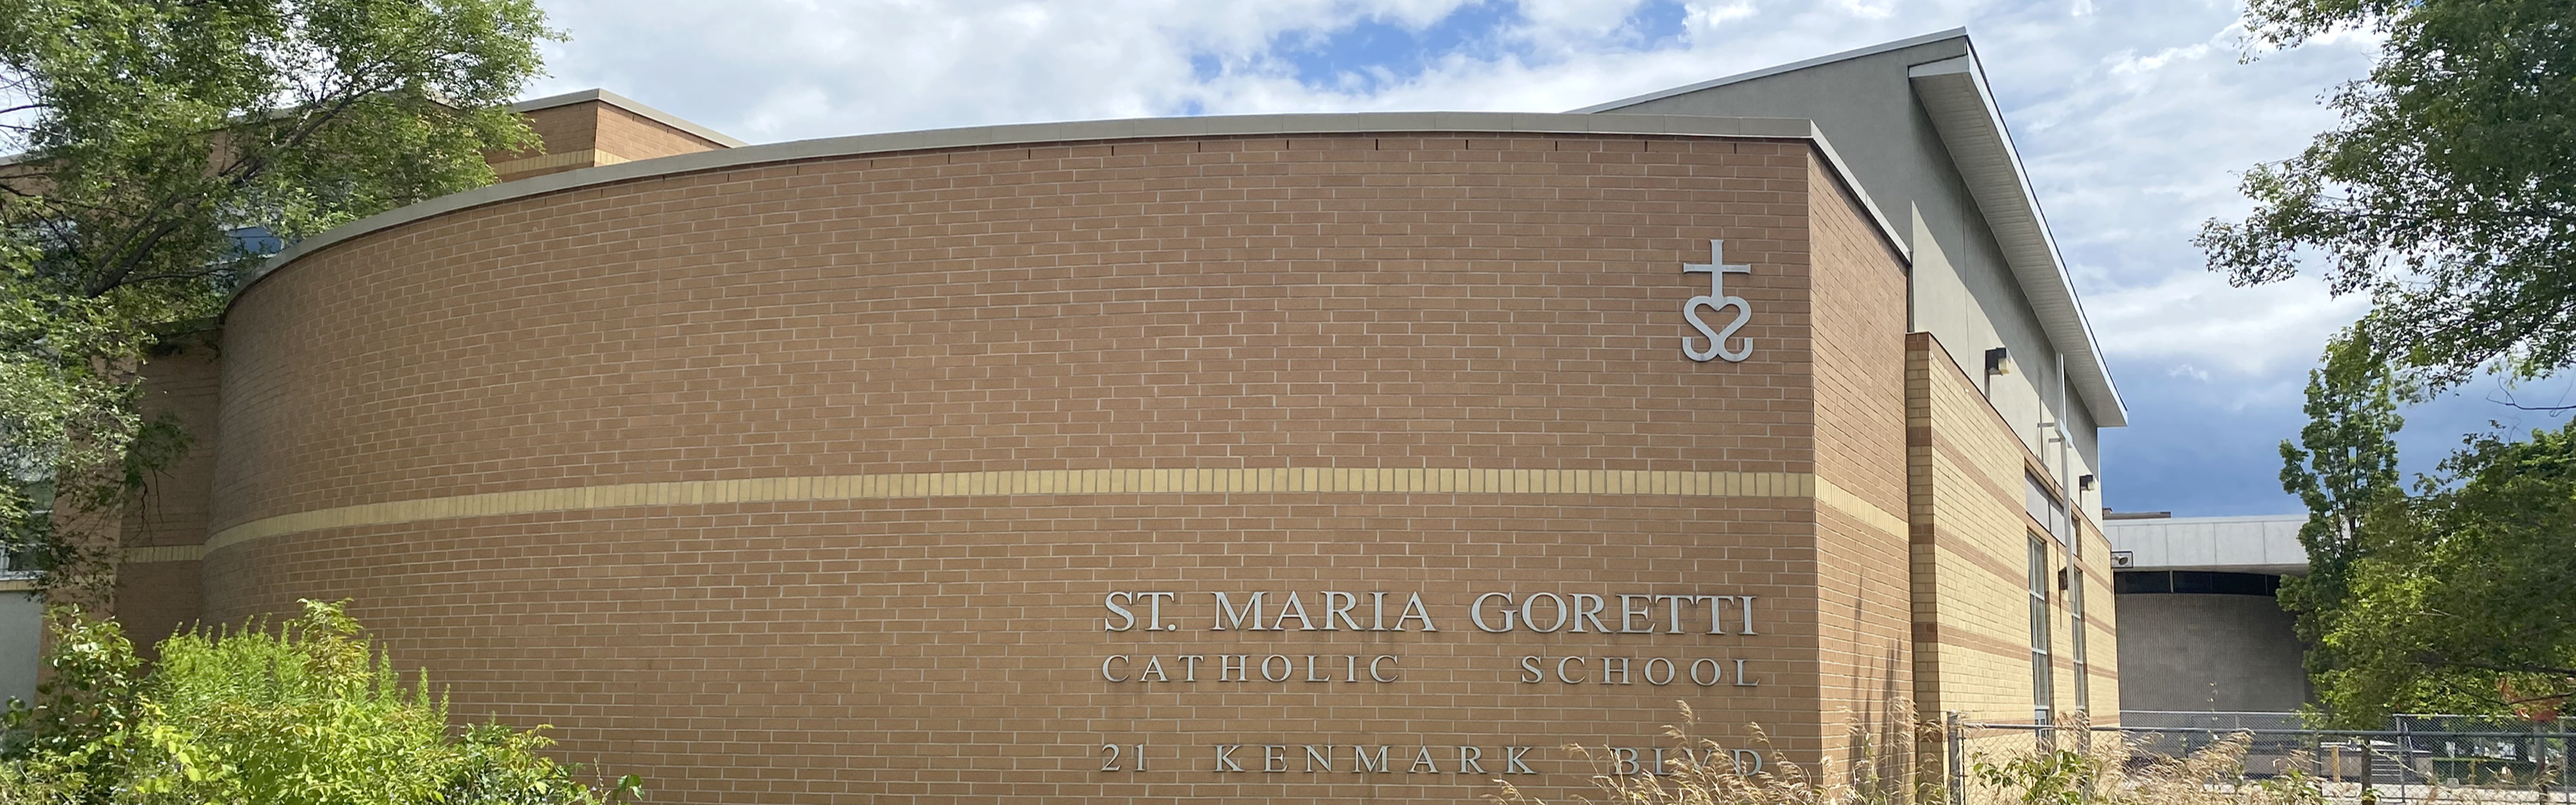 The front of the St. Maria Goretti Catholic School building.